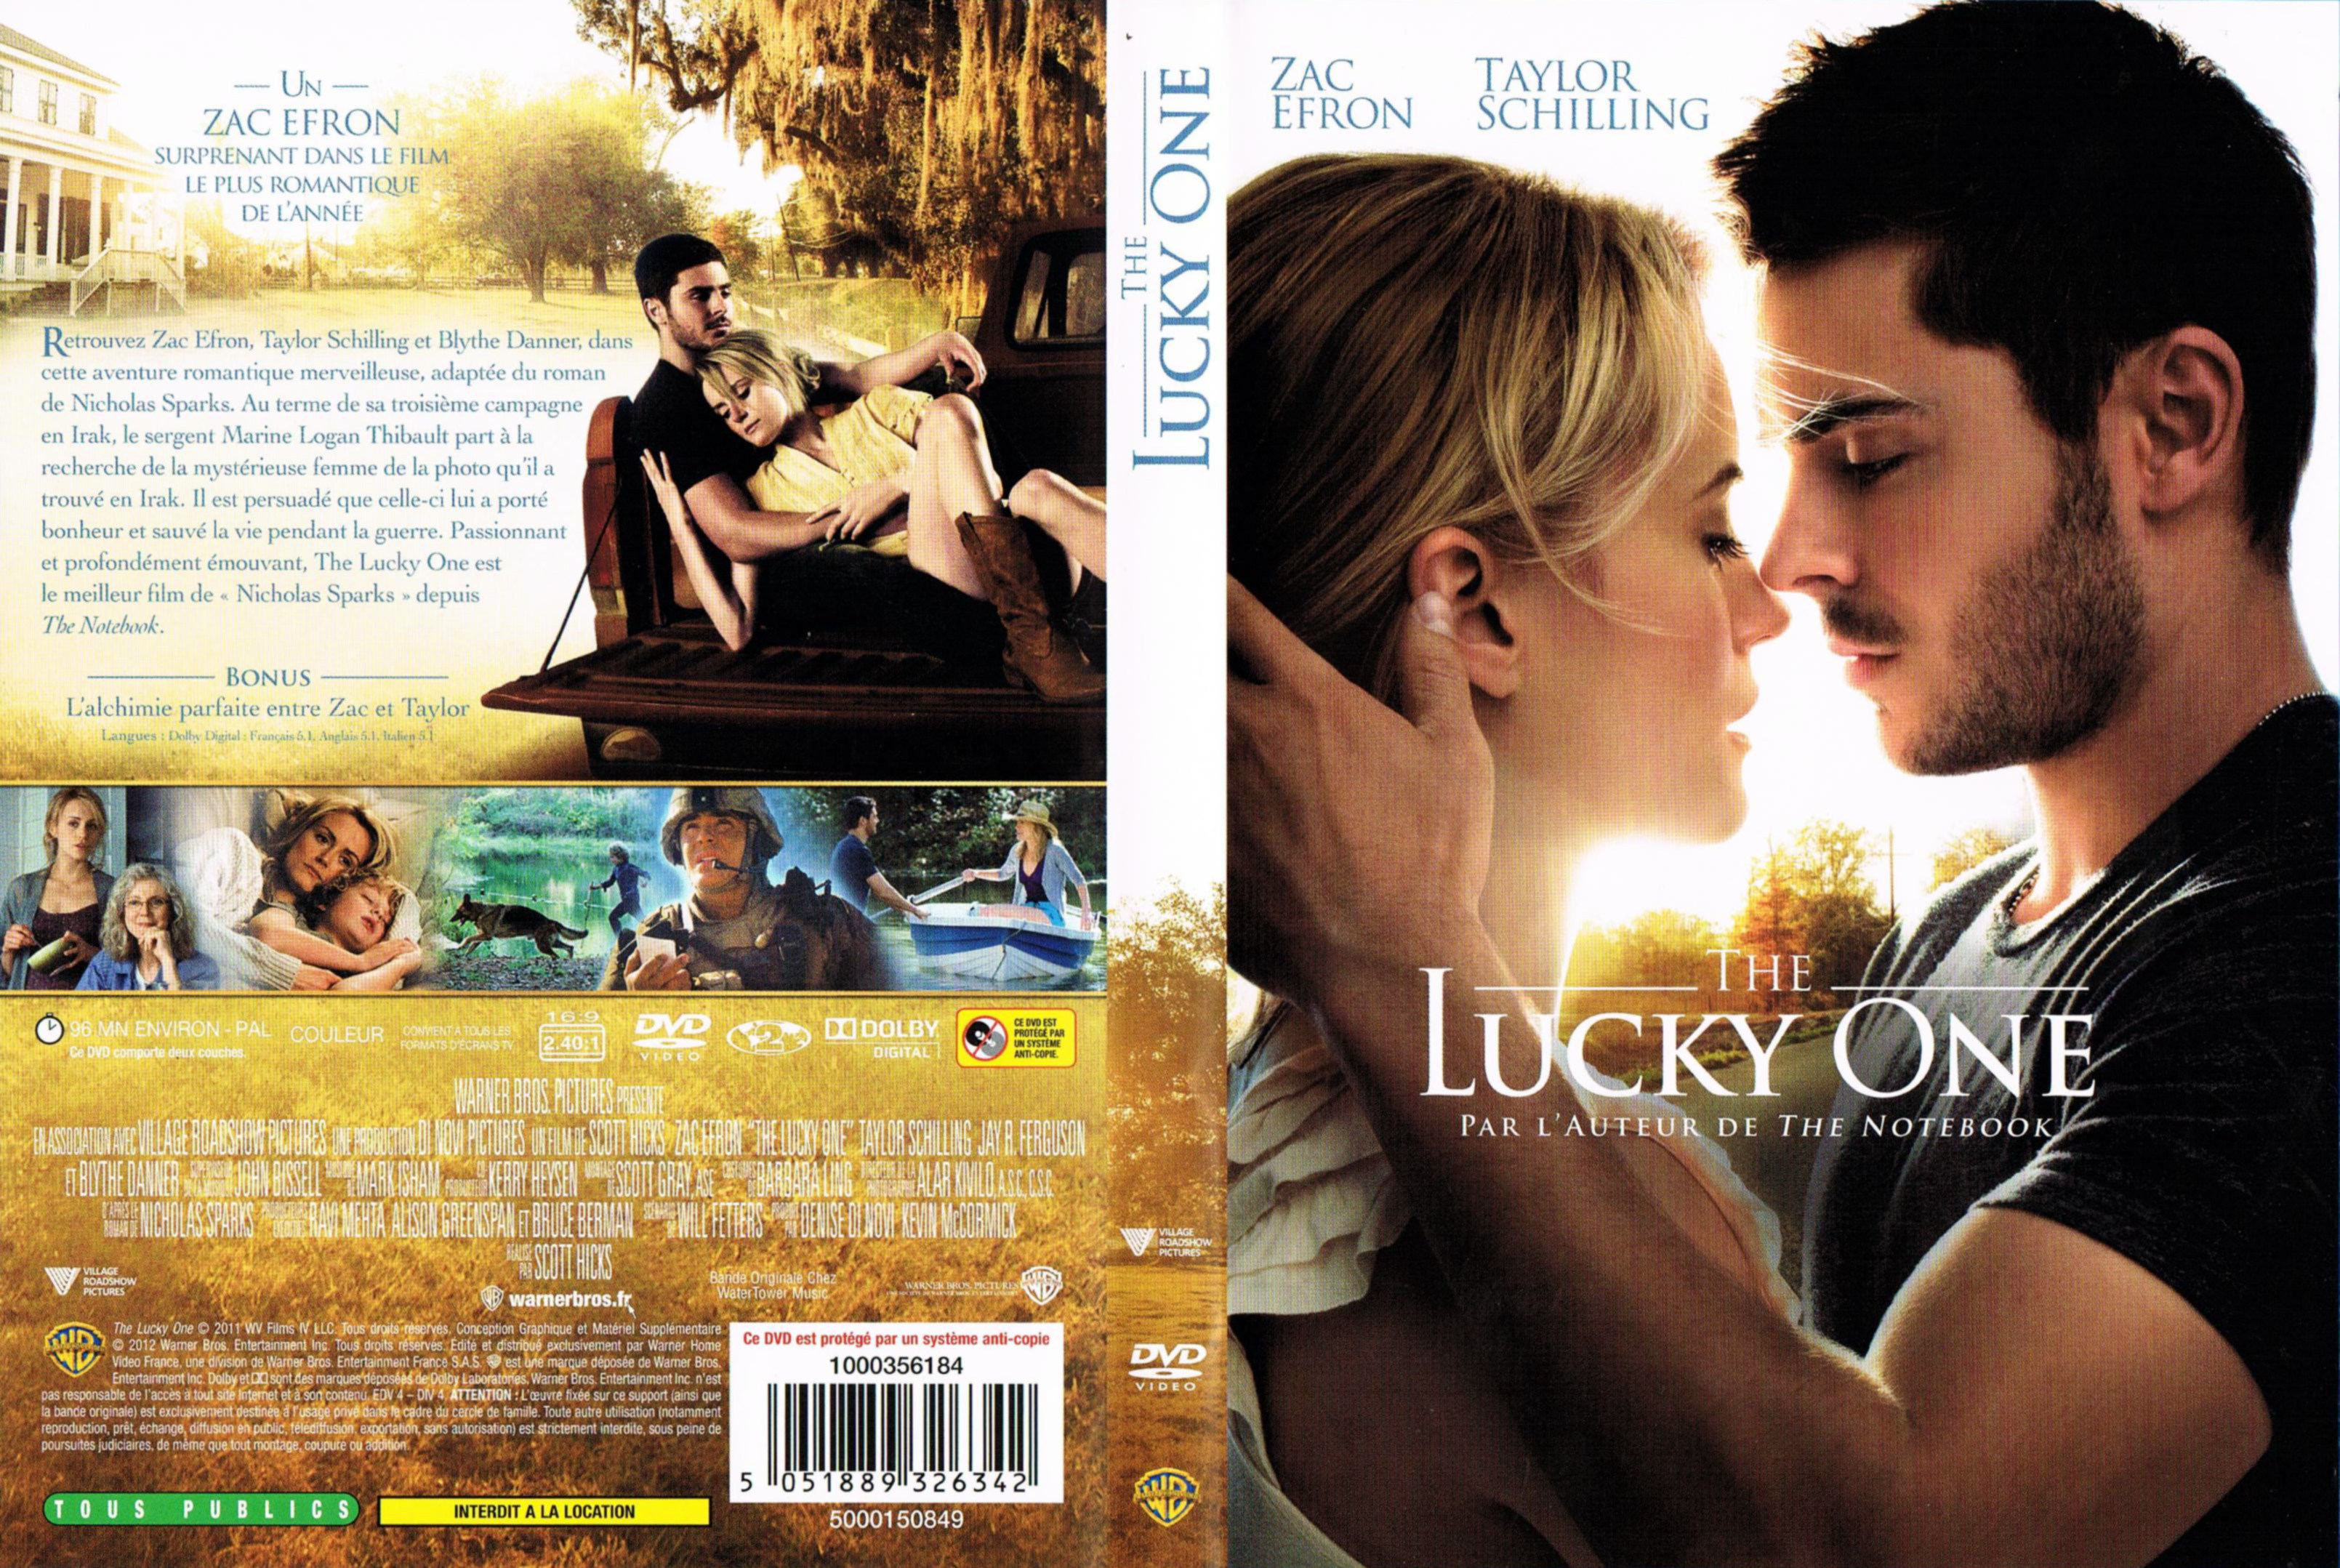 Jaquette DVD The lucky one